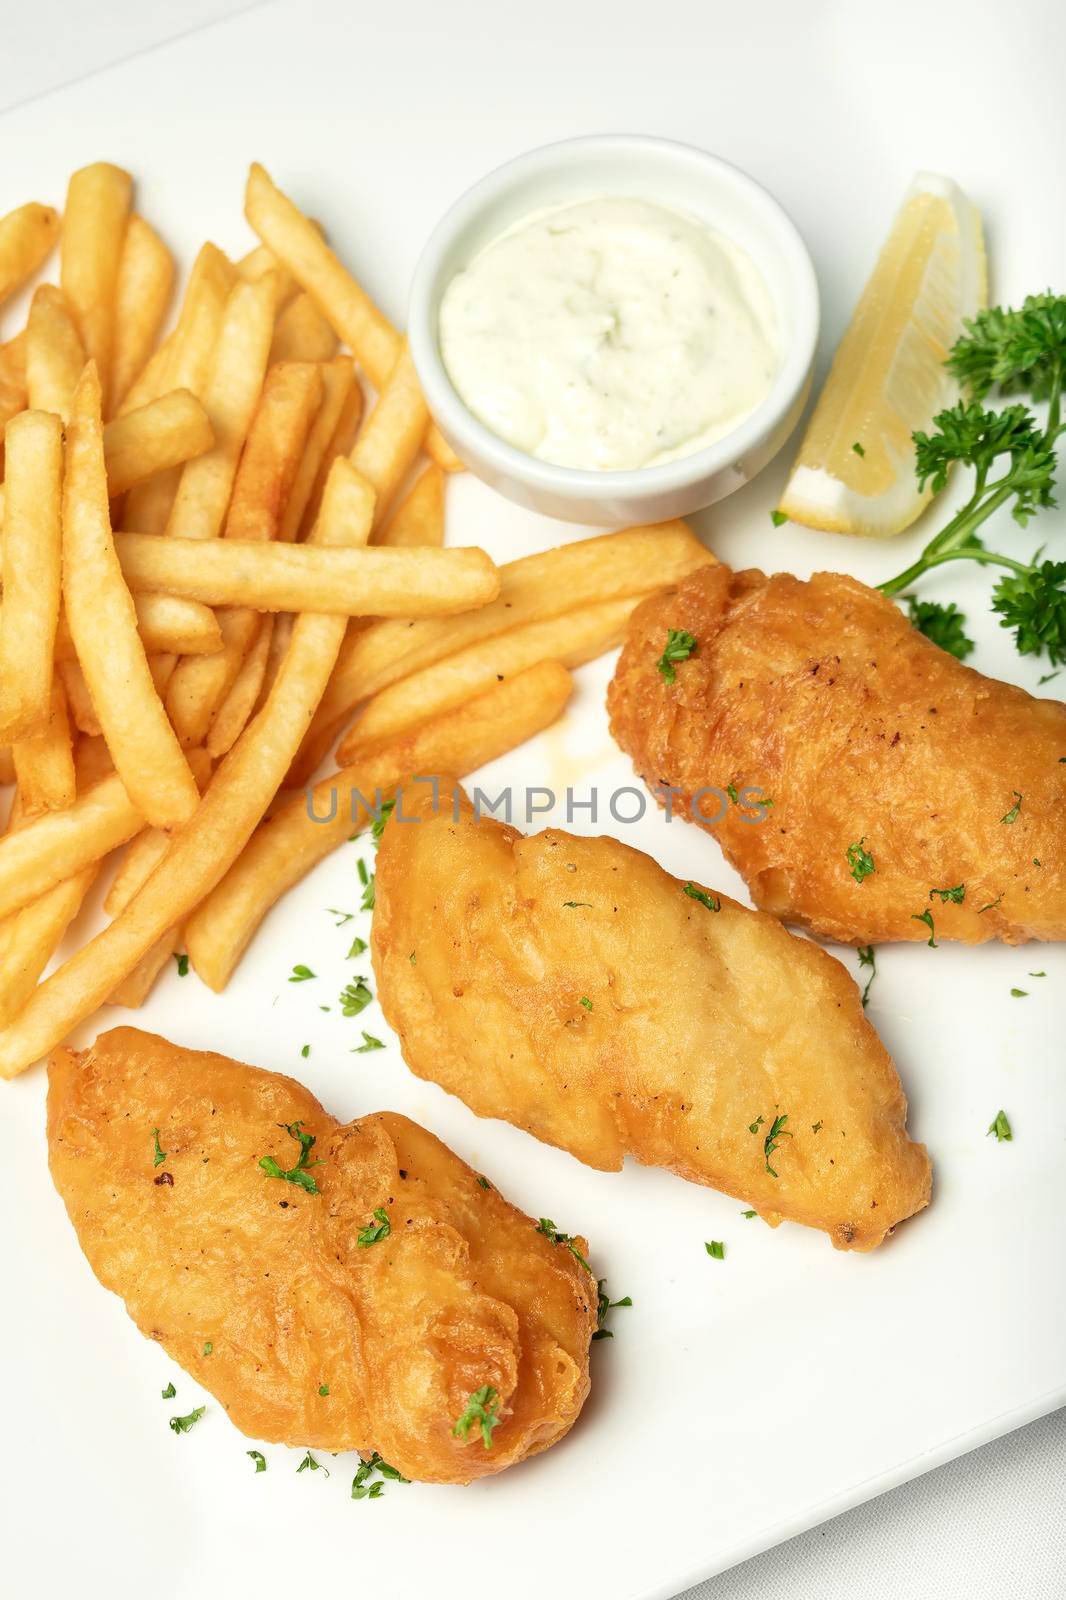 british traditional fish and chips meal on white plate